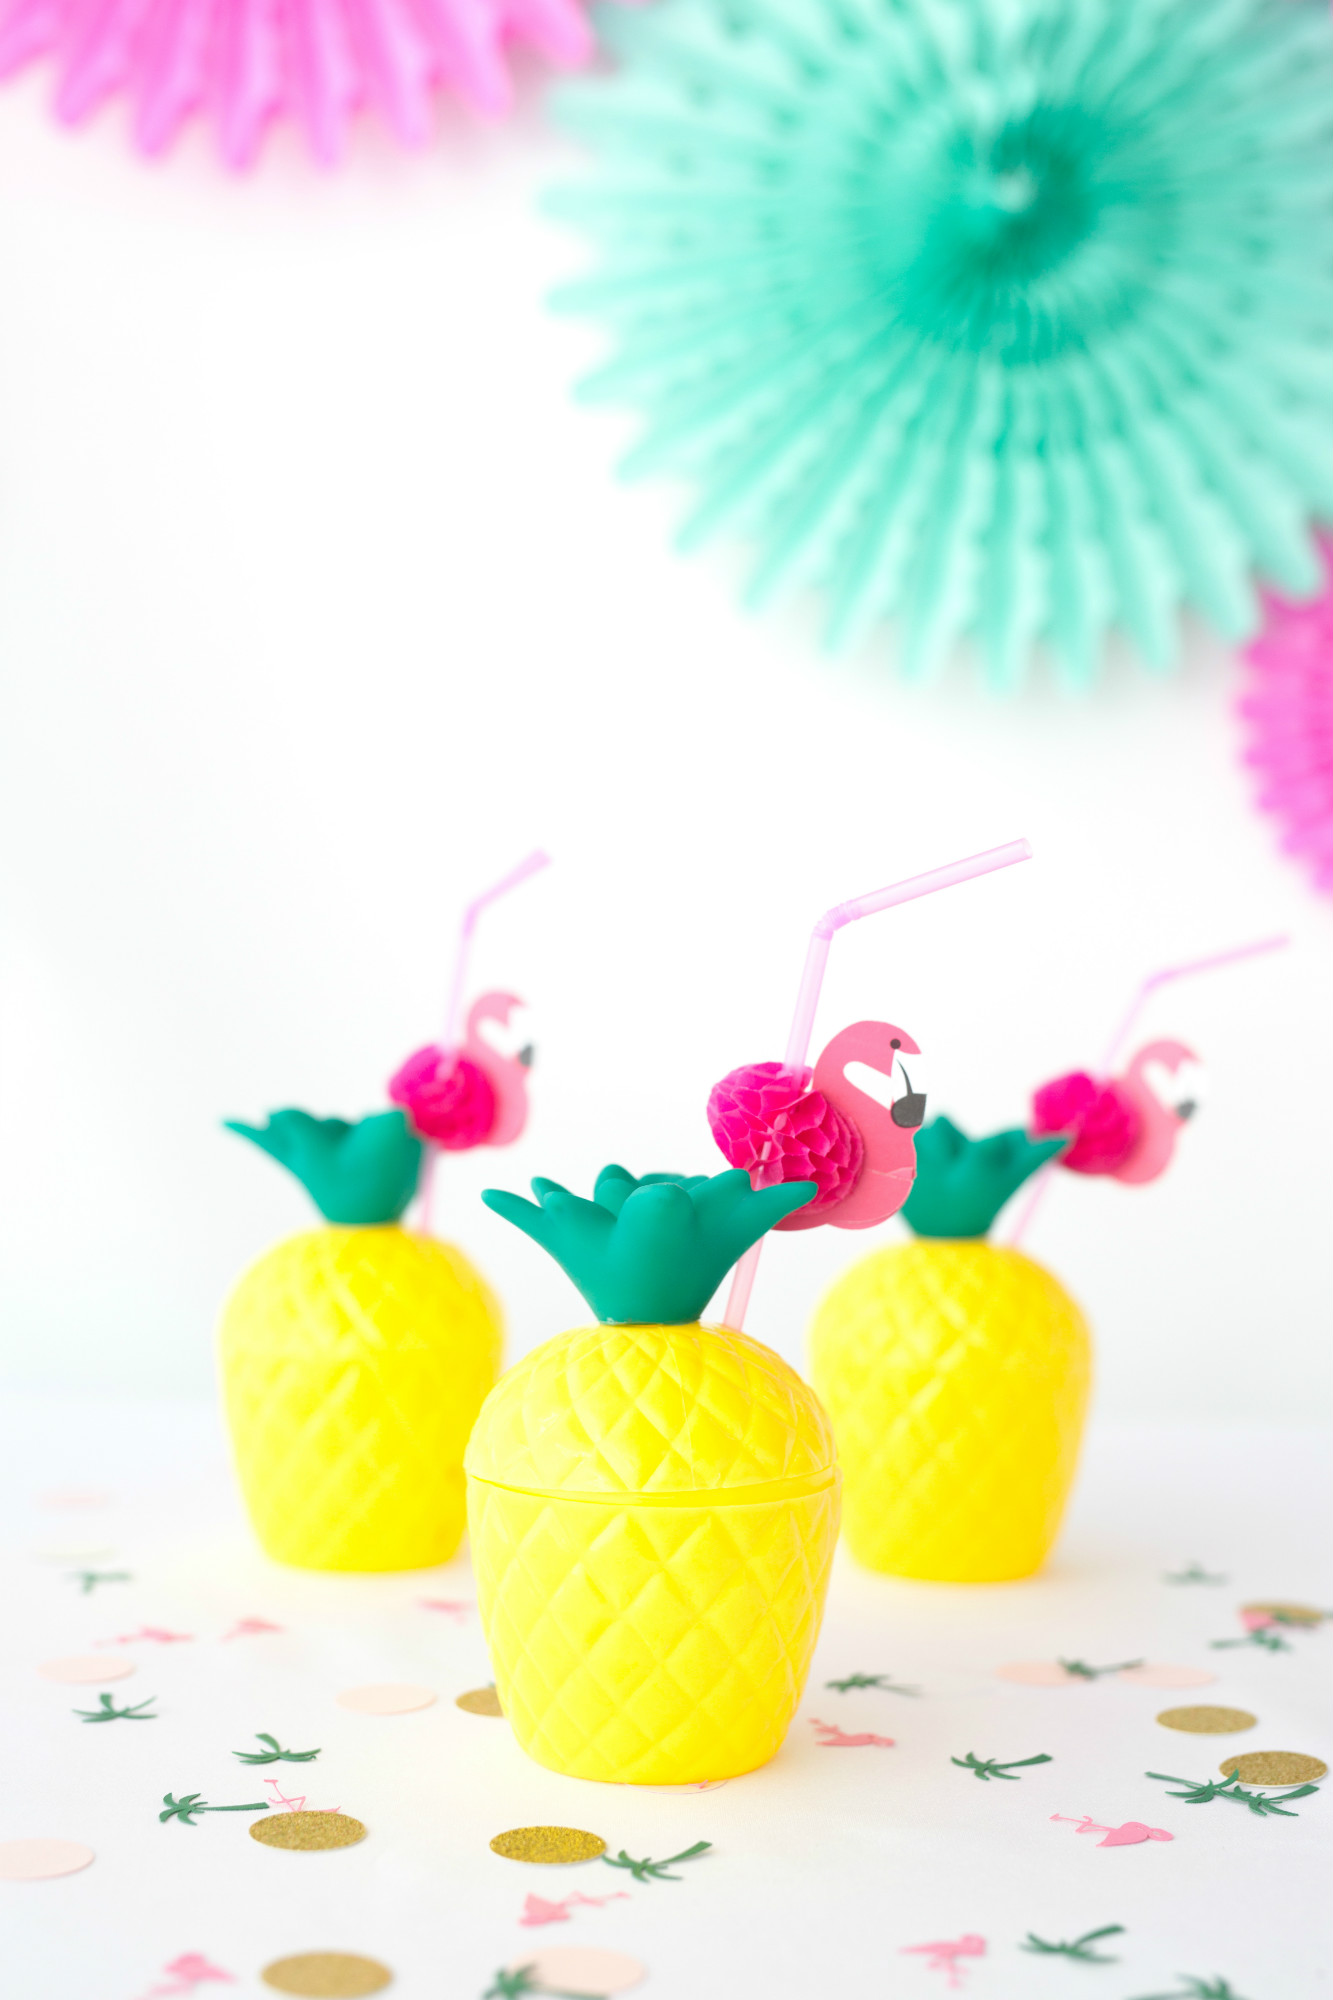 Pineapple Sippers and Flamingo Straws from Palm Springs Girls Night In featuring Rose Mini Moet Champagne| Black Twine